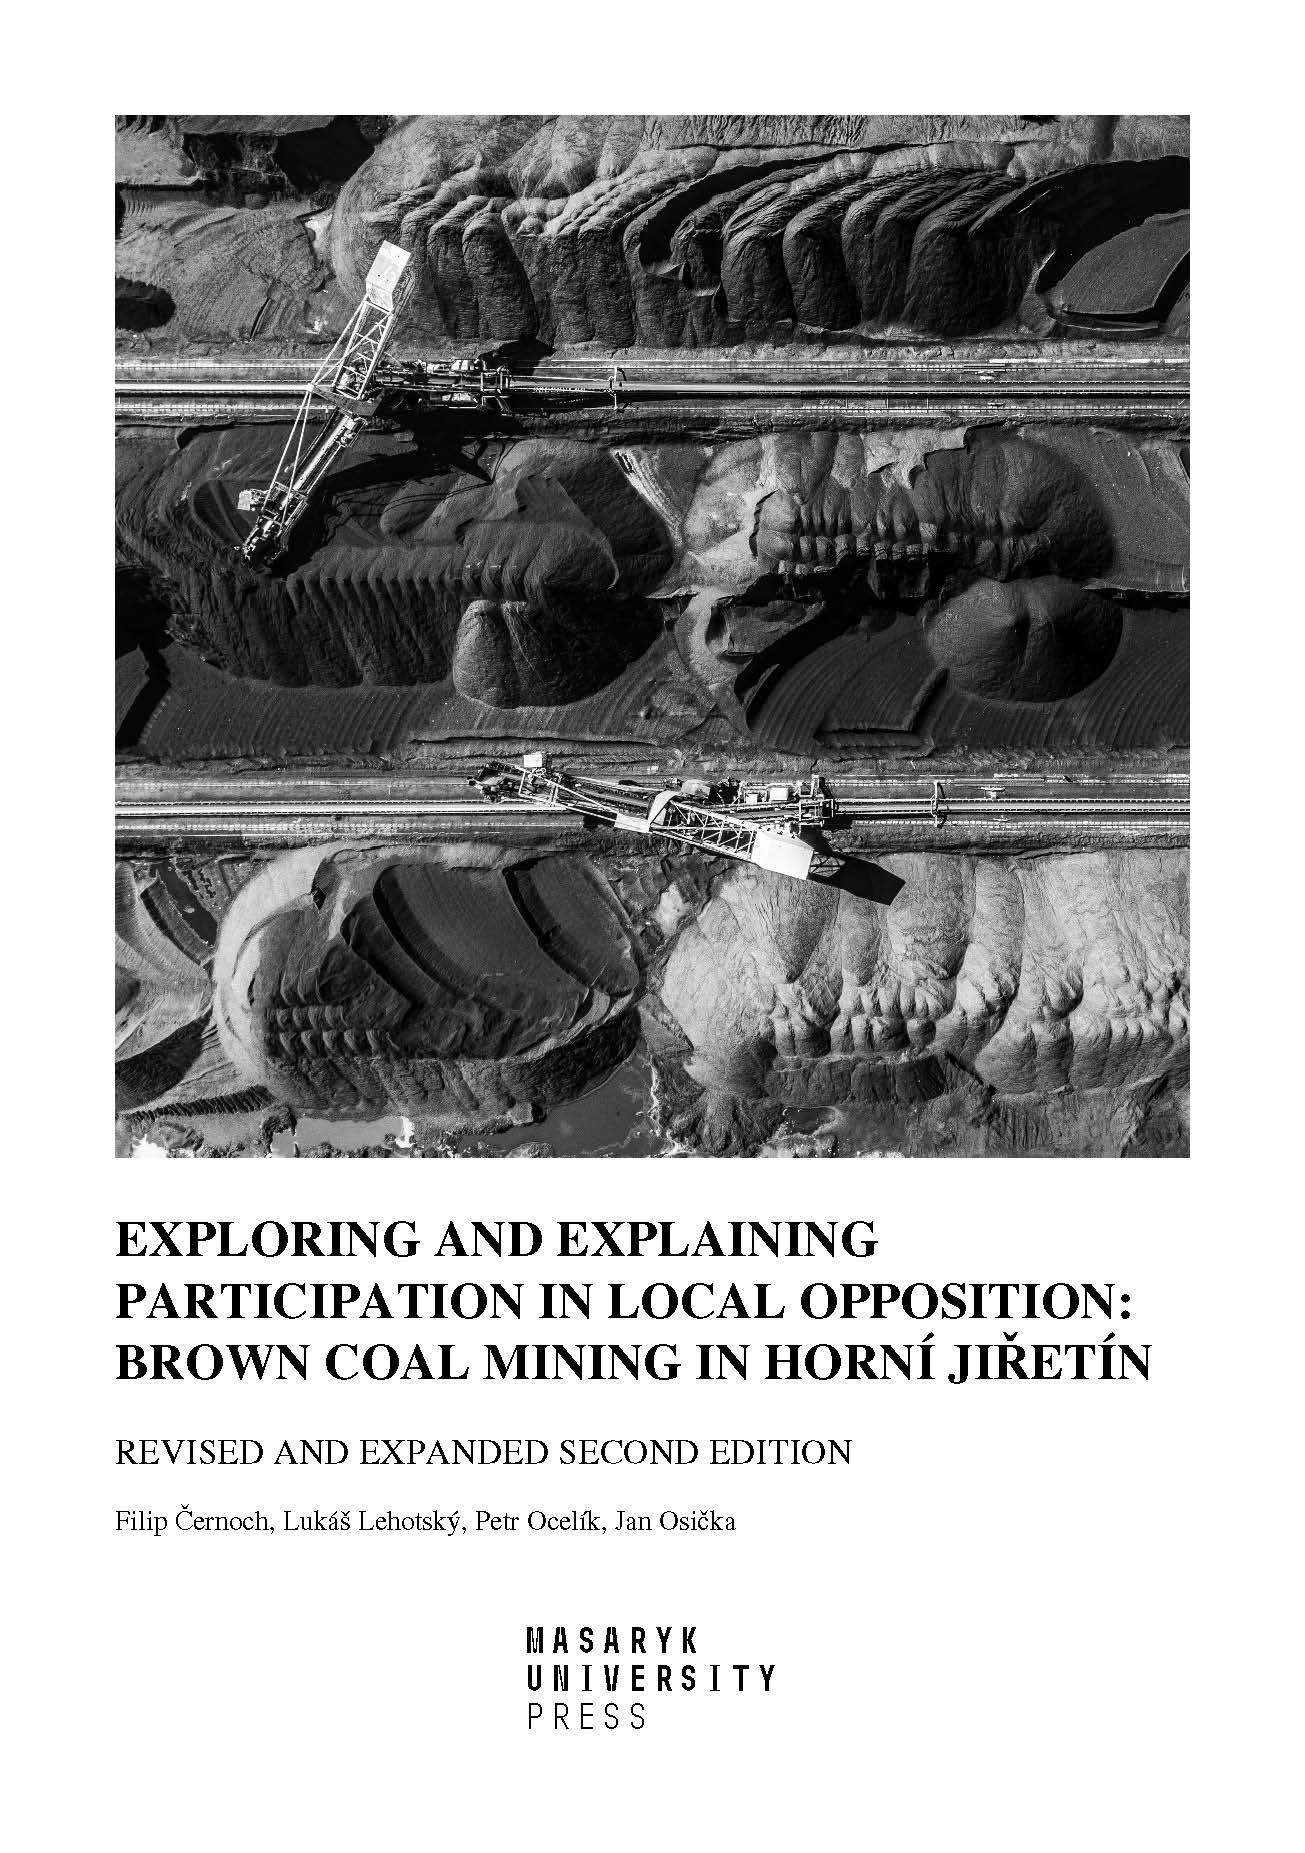 Obálka pro Exploring and explaining participation in local opposition: brown coal mining in Horní Jiřetín. Revised and expanded second edition